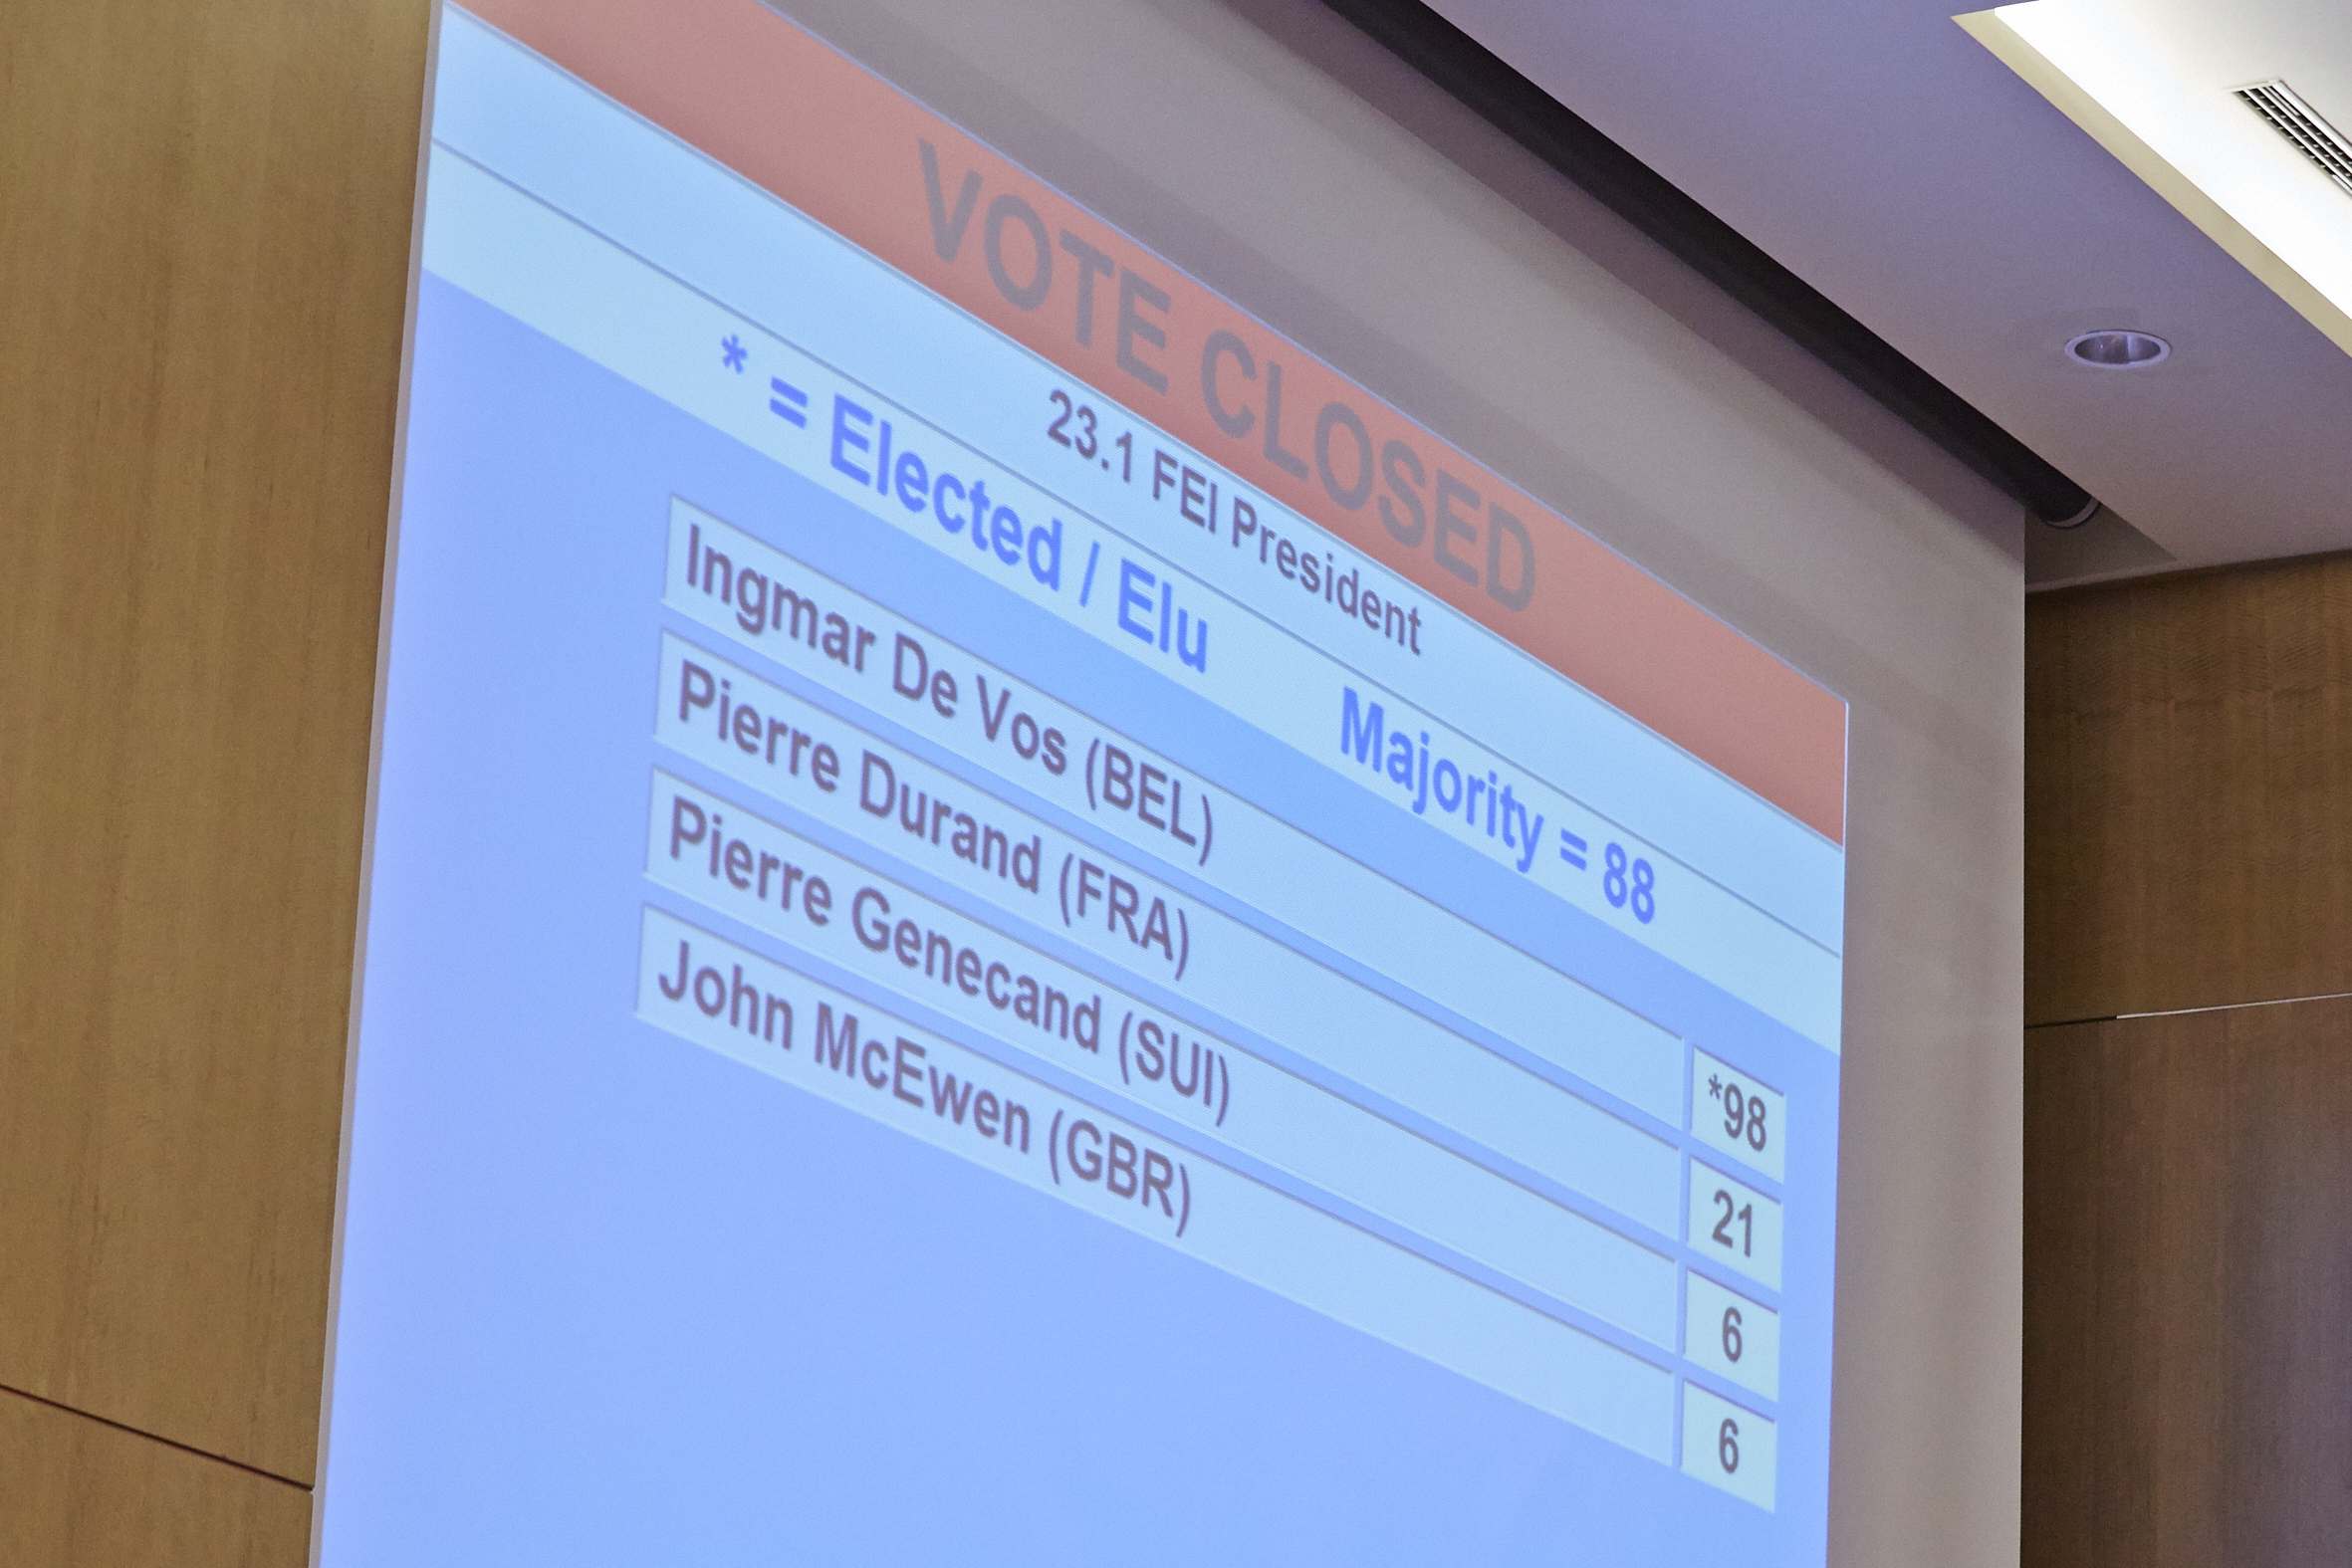 Ingmar De Vos garnered 98 votes out of a possible 131 at the FEI General Assembly ©FEI